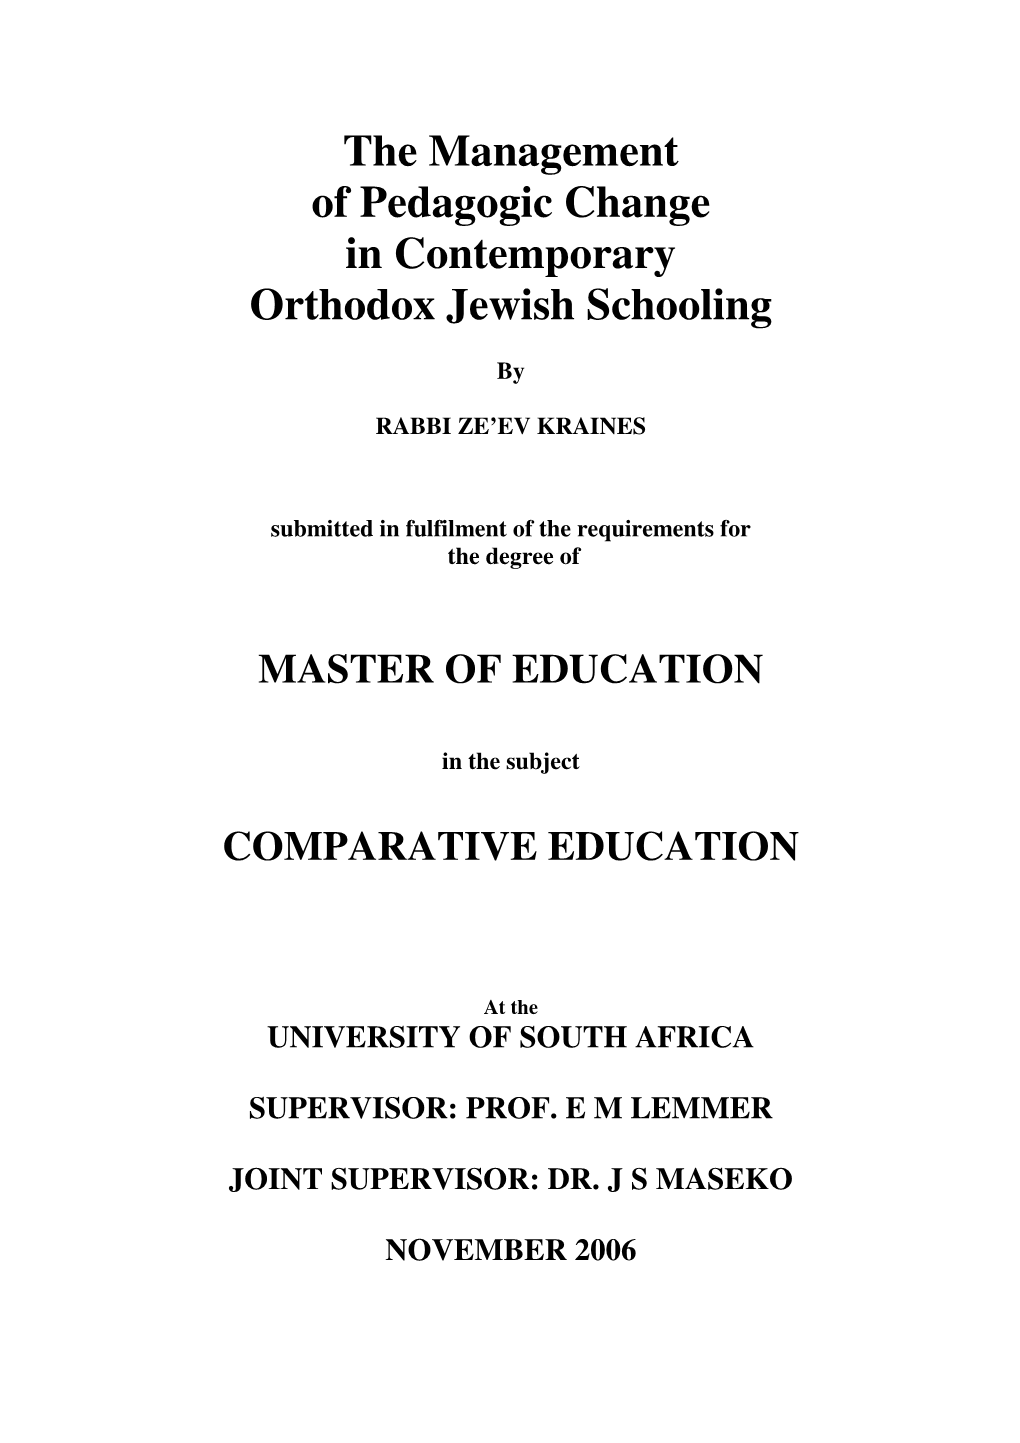 The Management of Pedagogic Change in Contemporary Orthodox Jewish Schooling